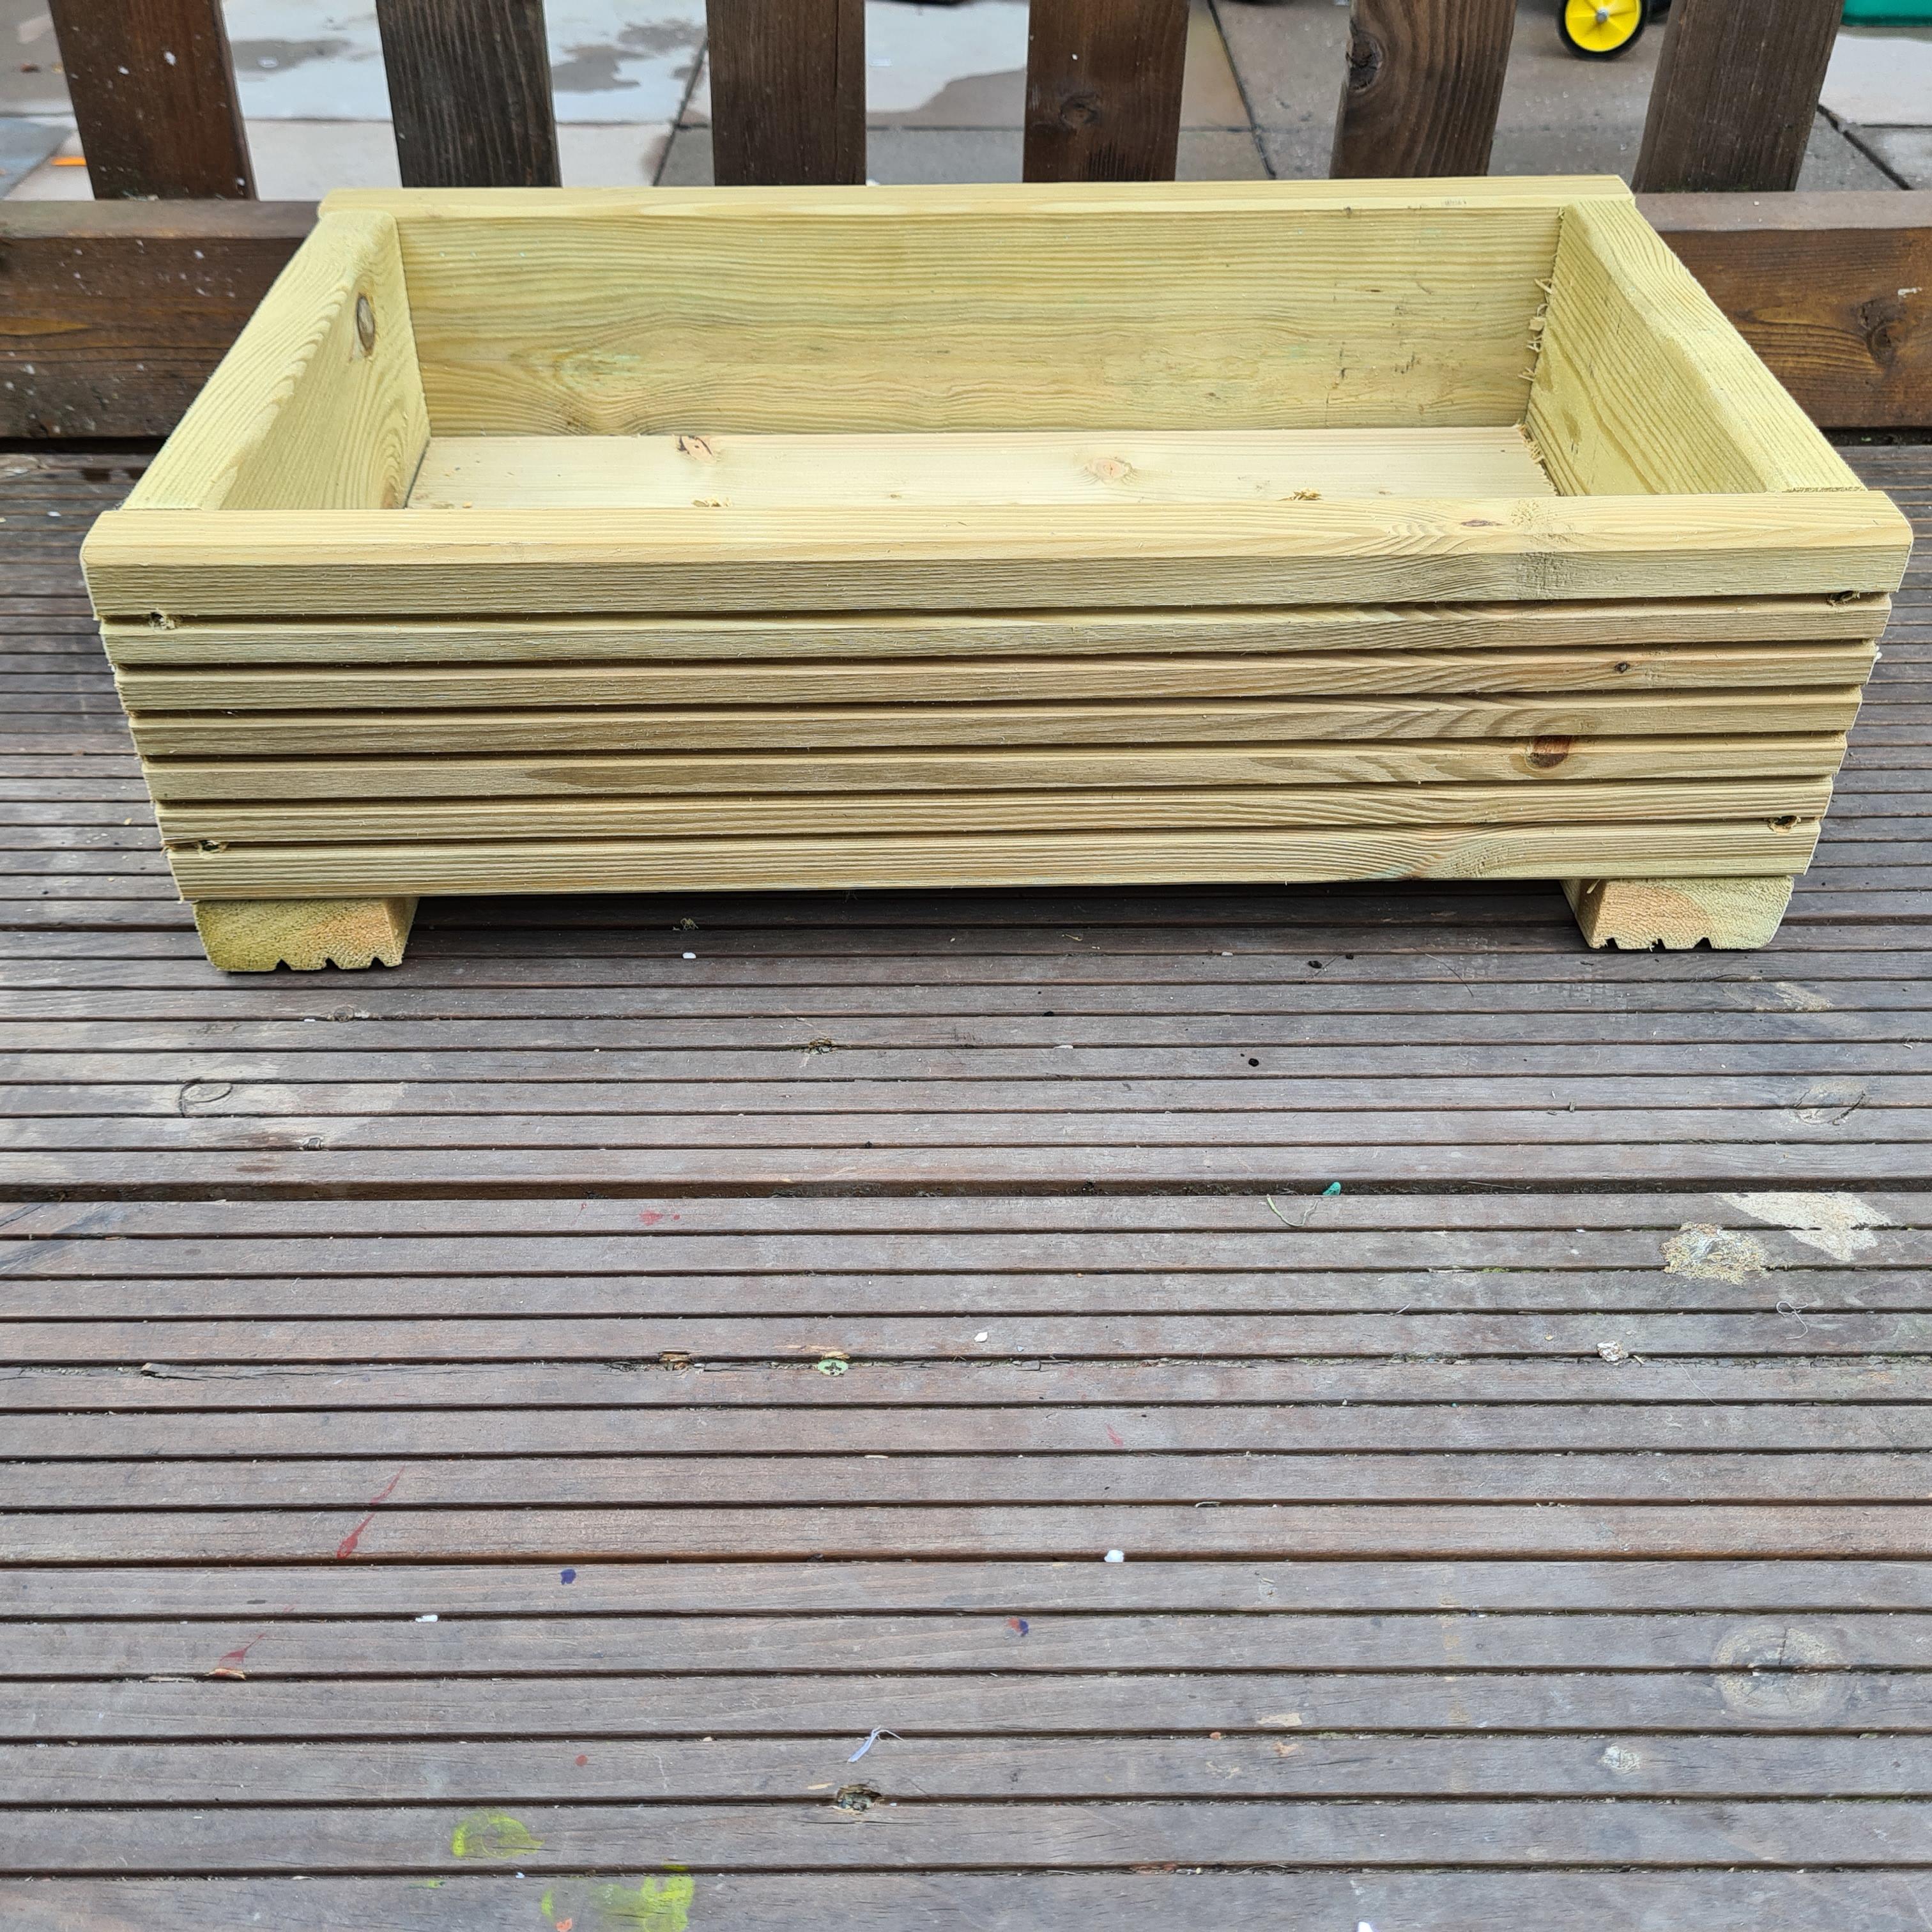 Decking planter on a decking base with a picket fence in the background